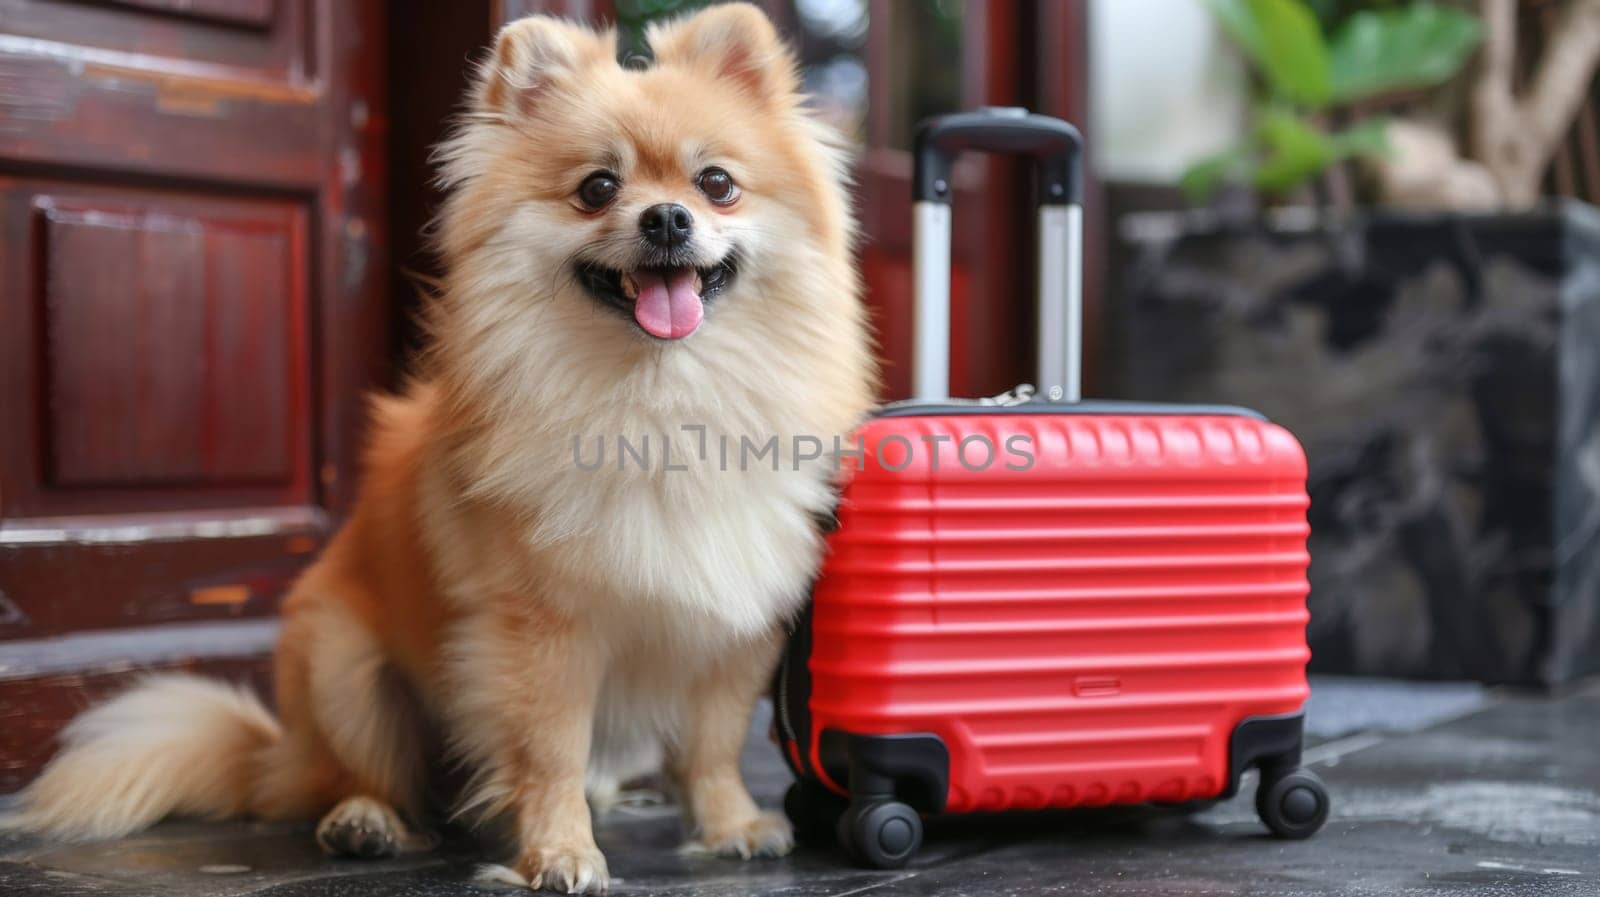 A small dog sitting next to a red suitcase on the floor, AI by starush